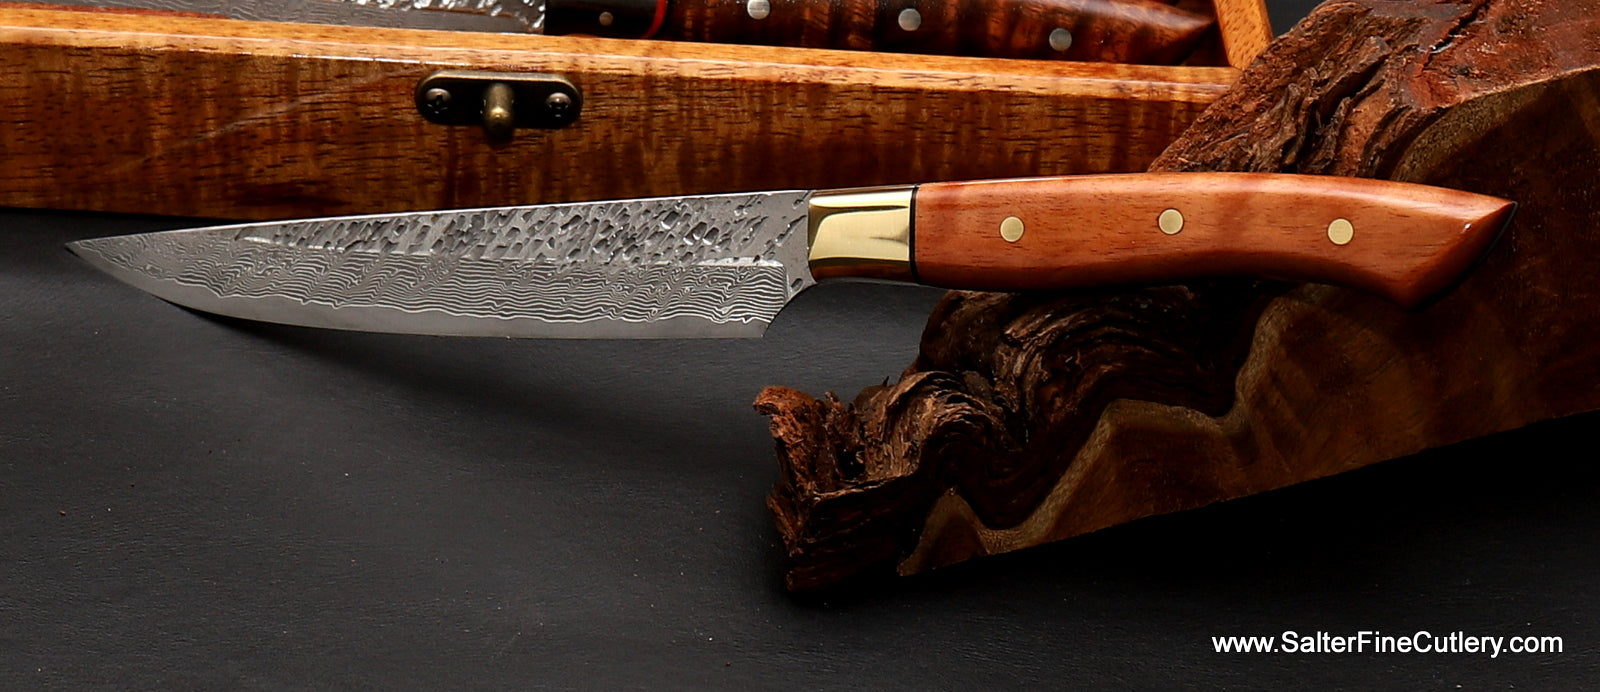 https://cdn.shopify.com/s/files/1/0993/8330/files/Single_steak_knife_with_Raptor_handforged_blade_and_Lychee_wood_handle_by_Salter_Fine_Cutlery_b44c7f53-fc03-4dc1-8934-ce408841ef1d.jpg?v=1606705797